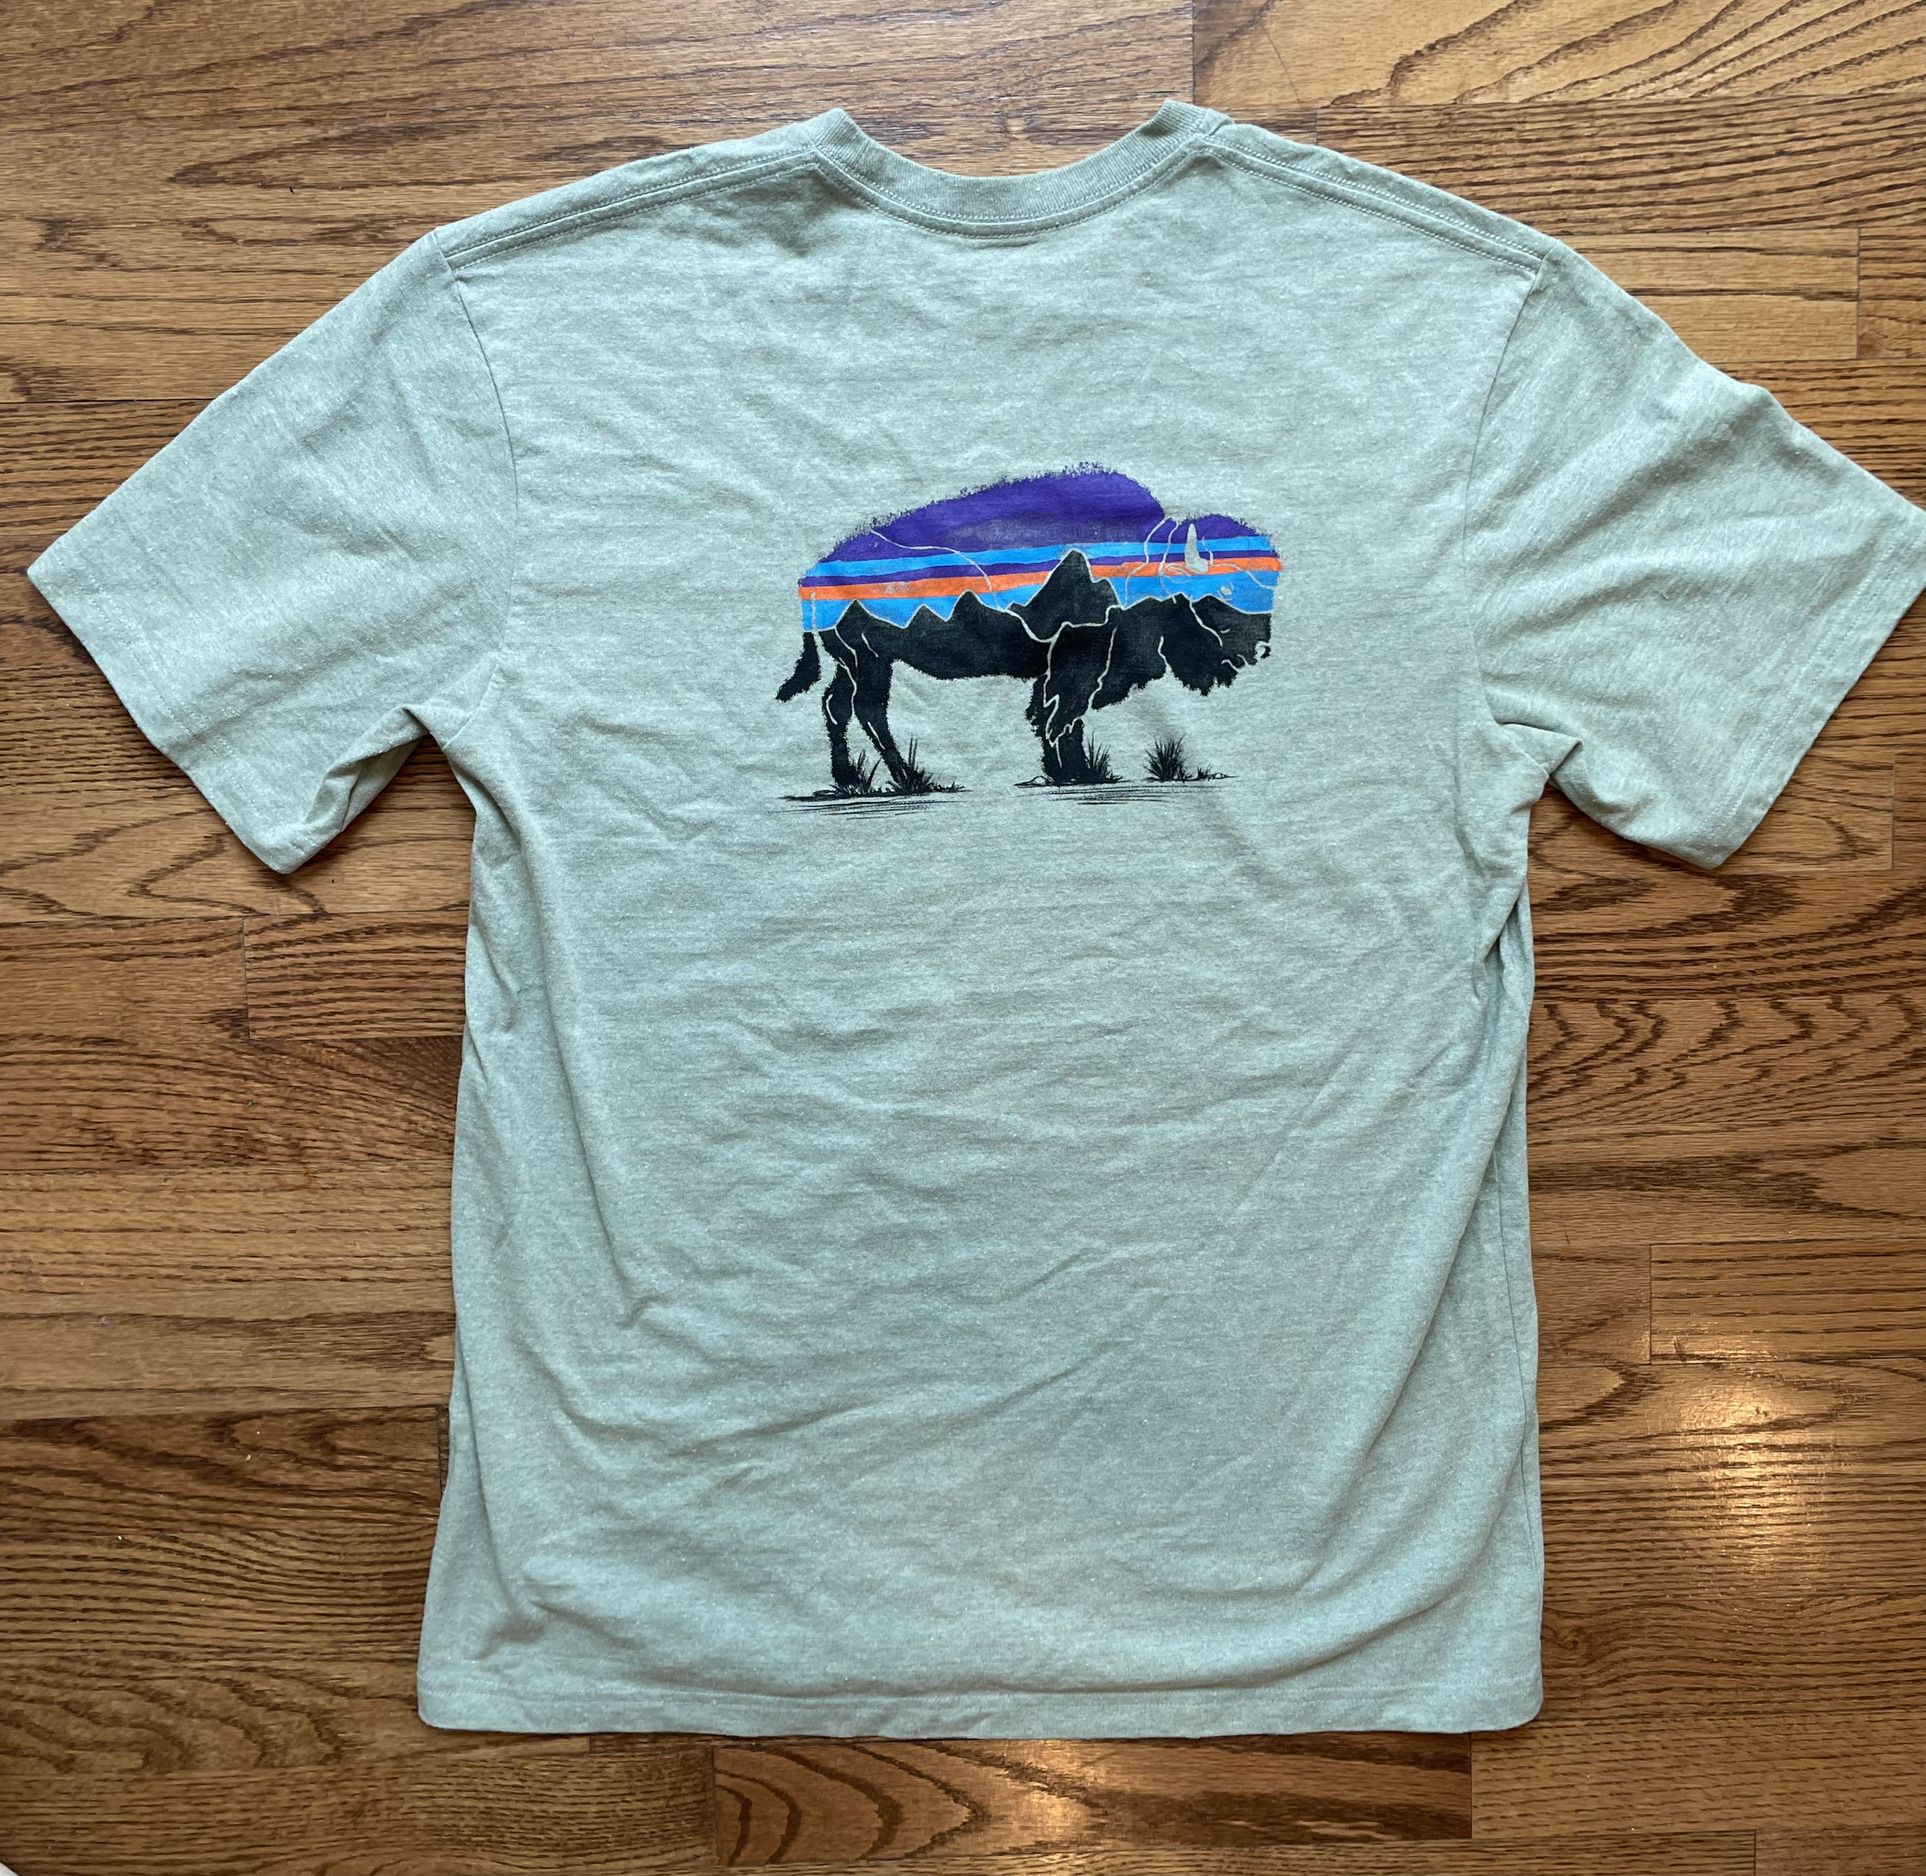 Patagonia Mens Responsibili-tee Green Short Sleeve Recycled Material Shirt Sz M. Condition is pre owned and is overall in very solid and respectable s